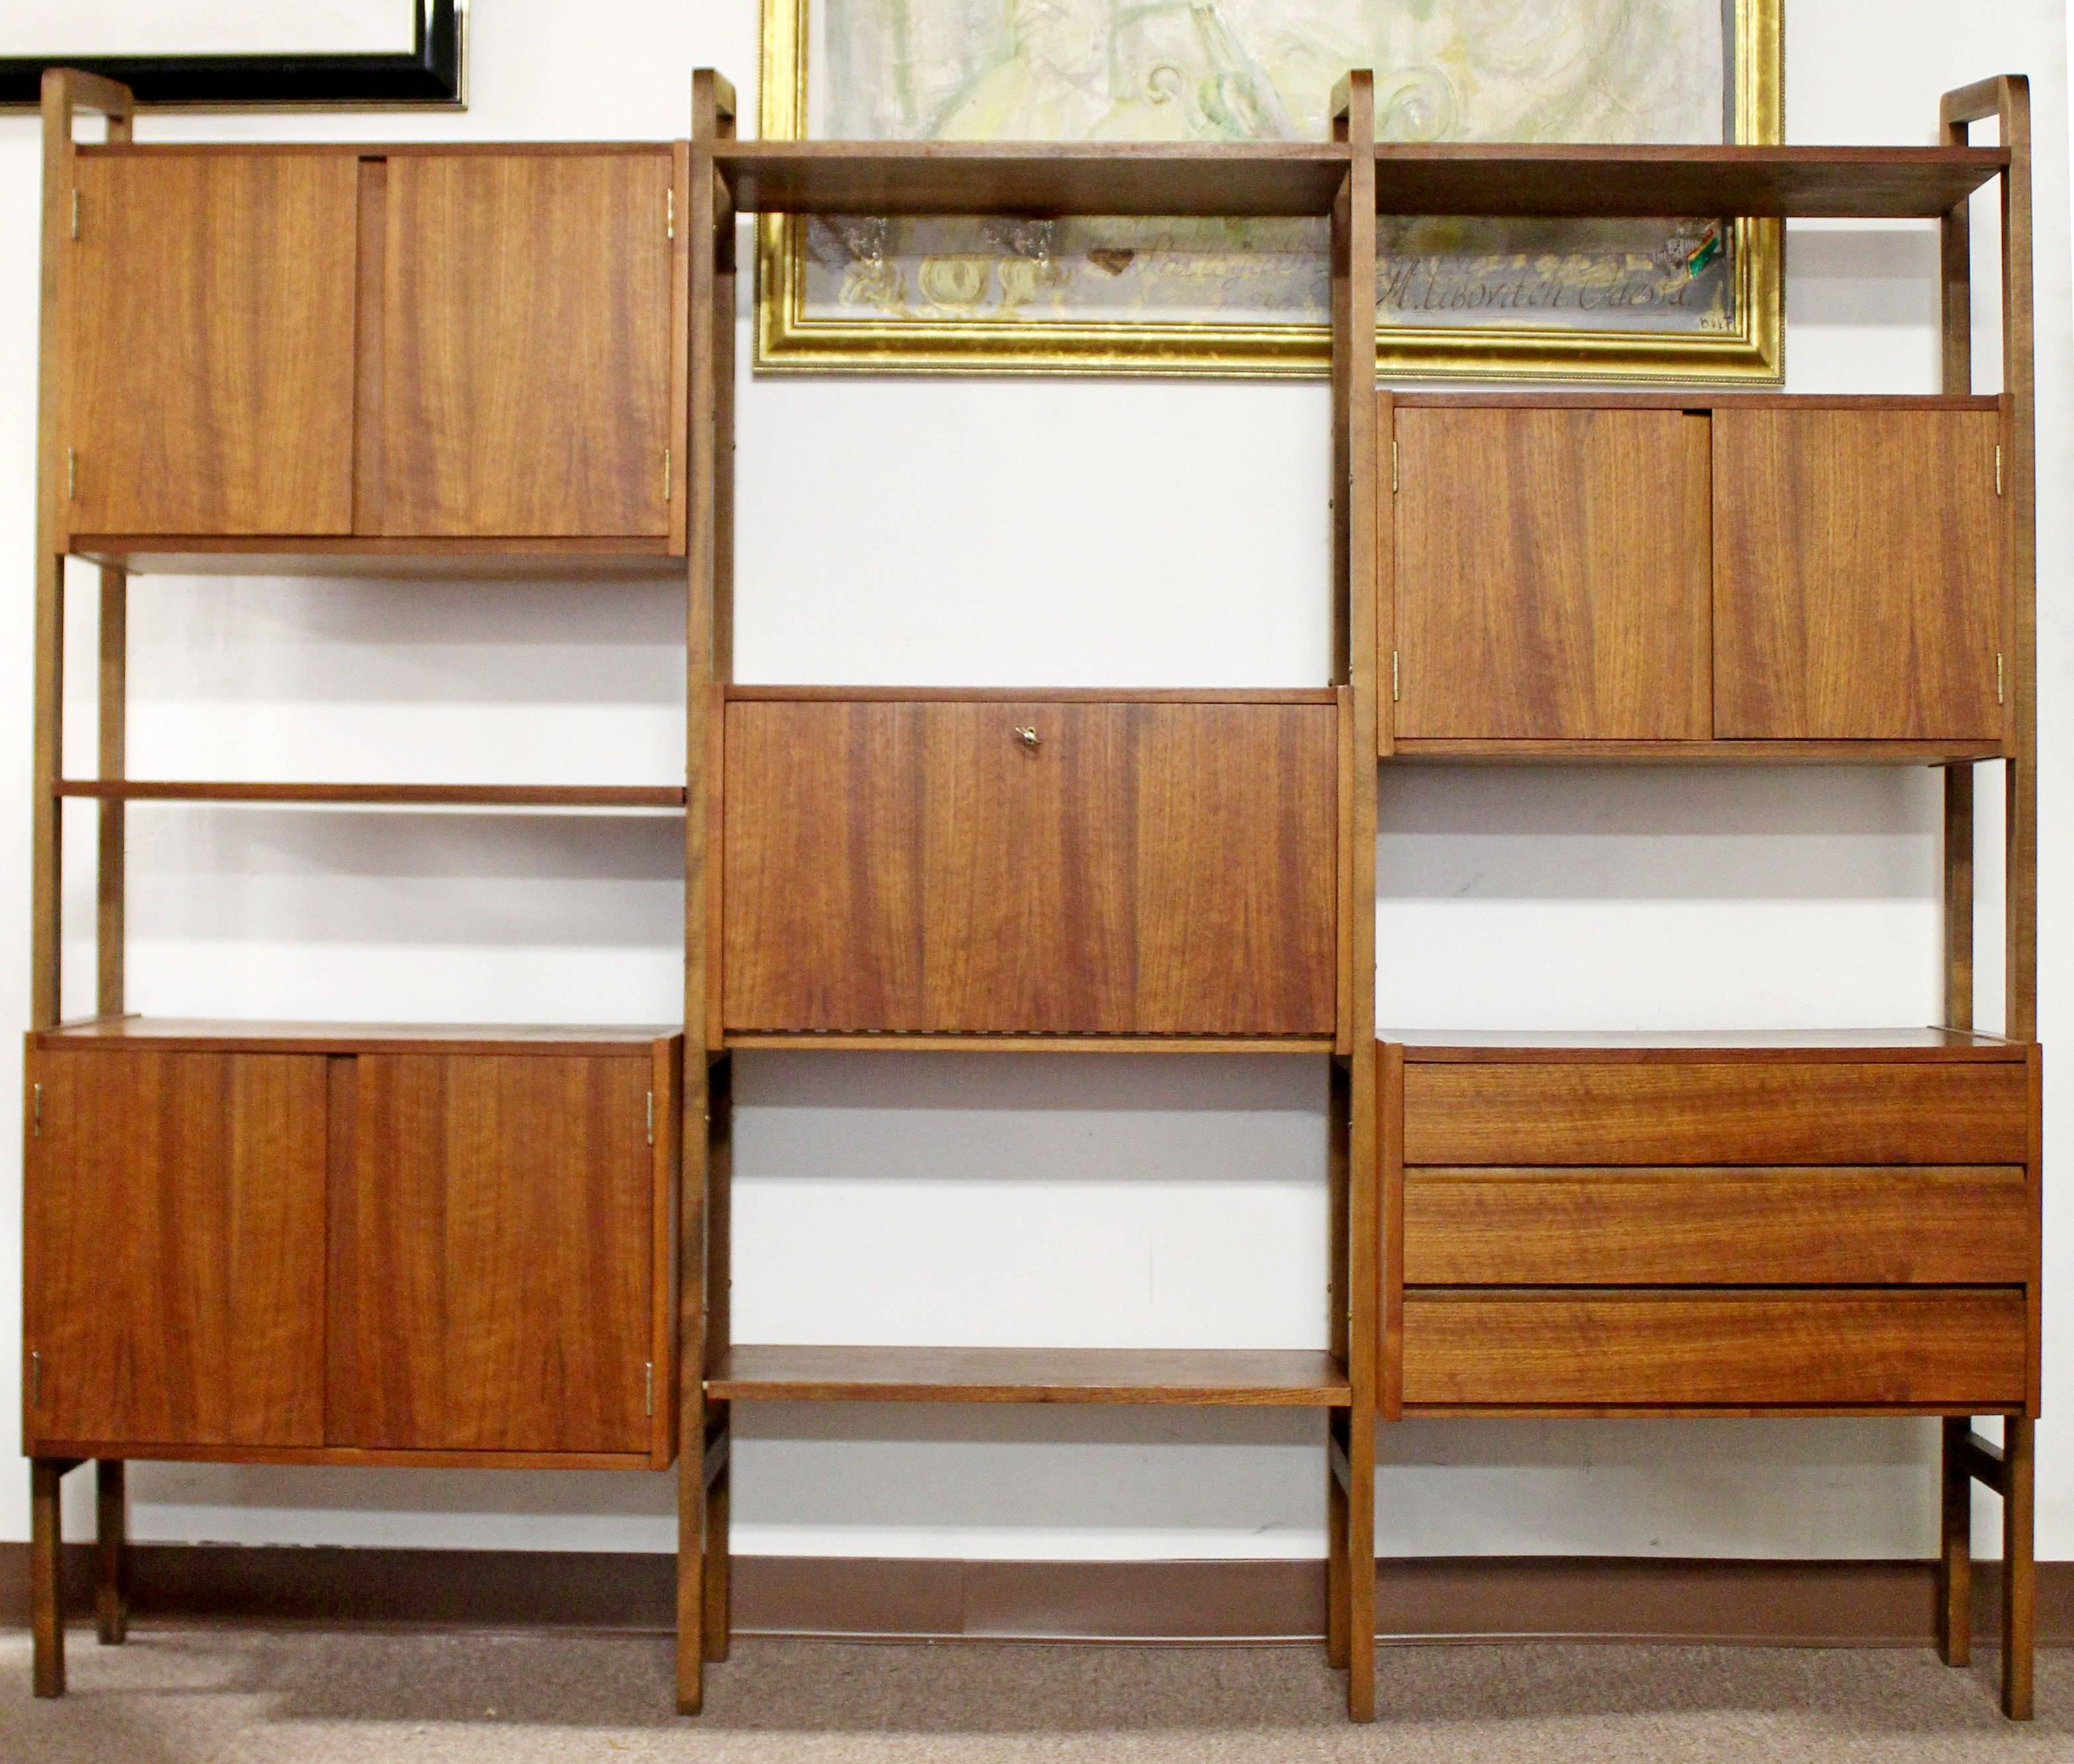 For your consideration is an absolutely beautiful, free-standing, walnut room divider, shelving unit, circa the 1960s. In excellent condition. The dimensions are 87